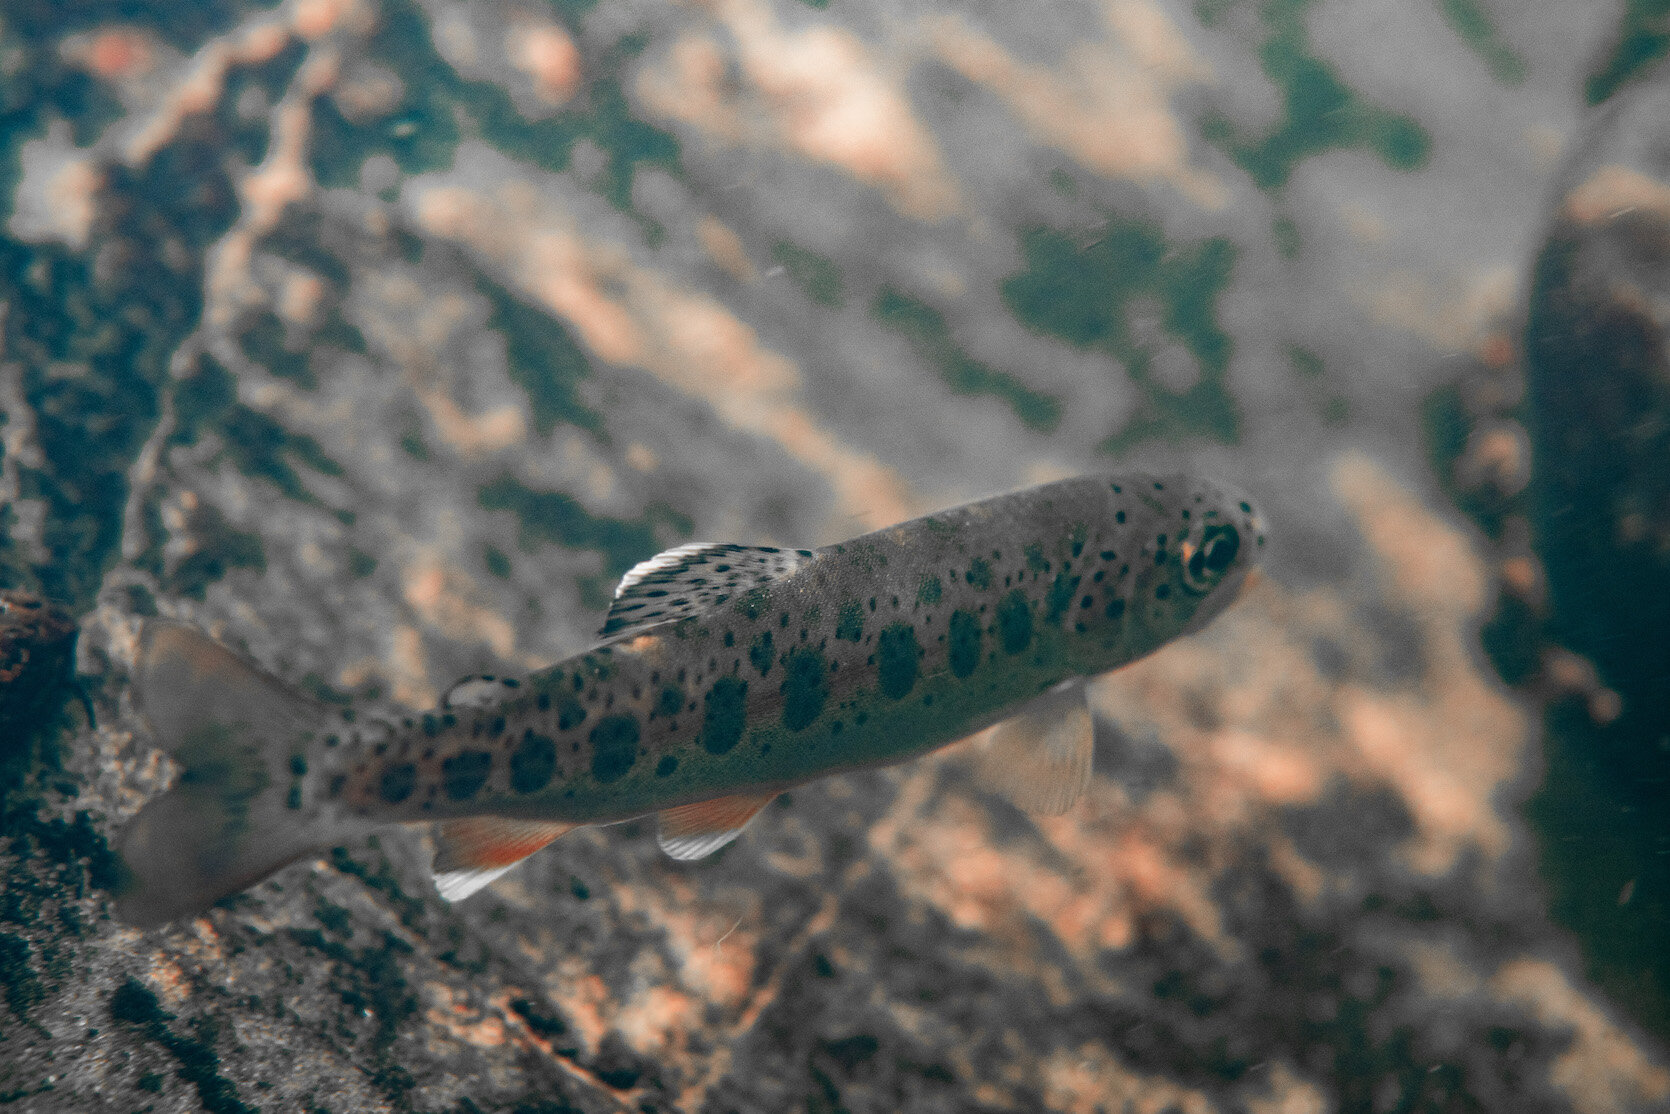 Oregon Freshwater Redband Trout by Laura Tesler